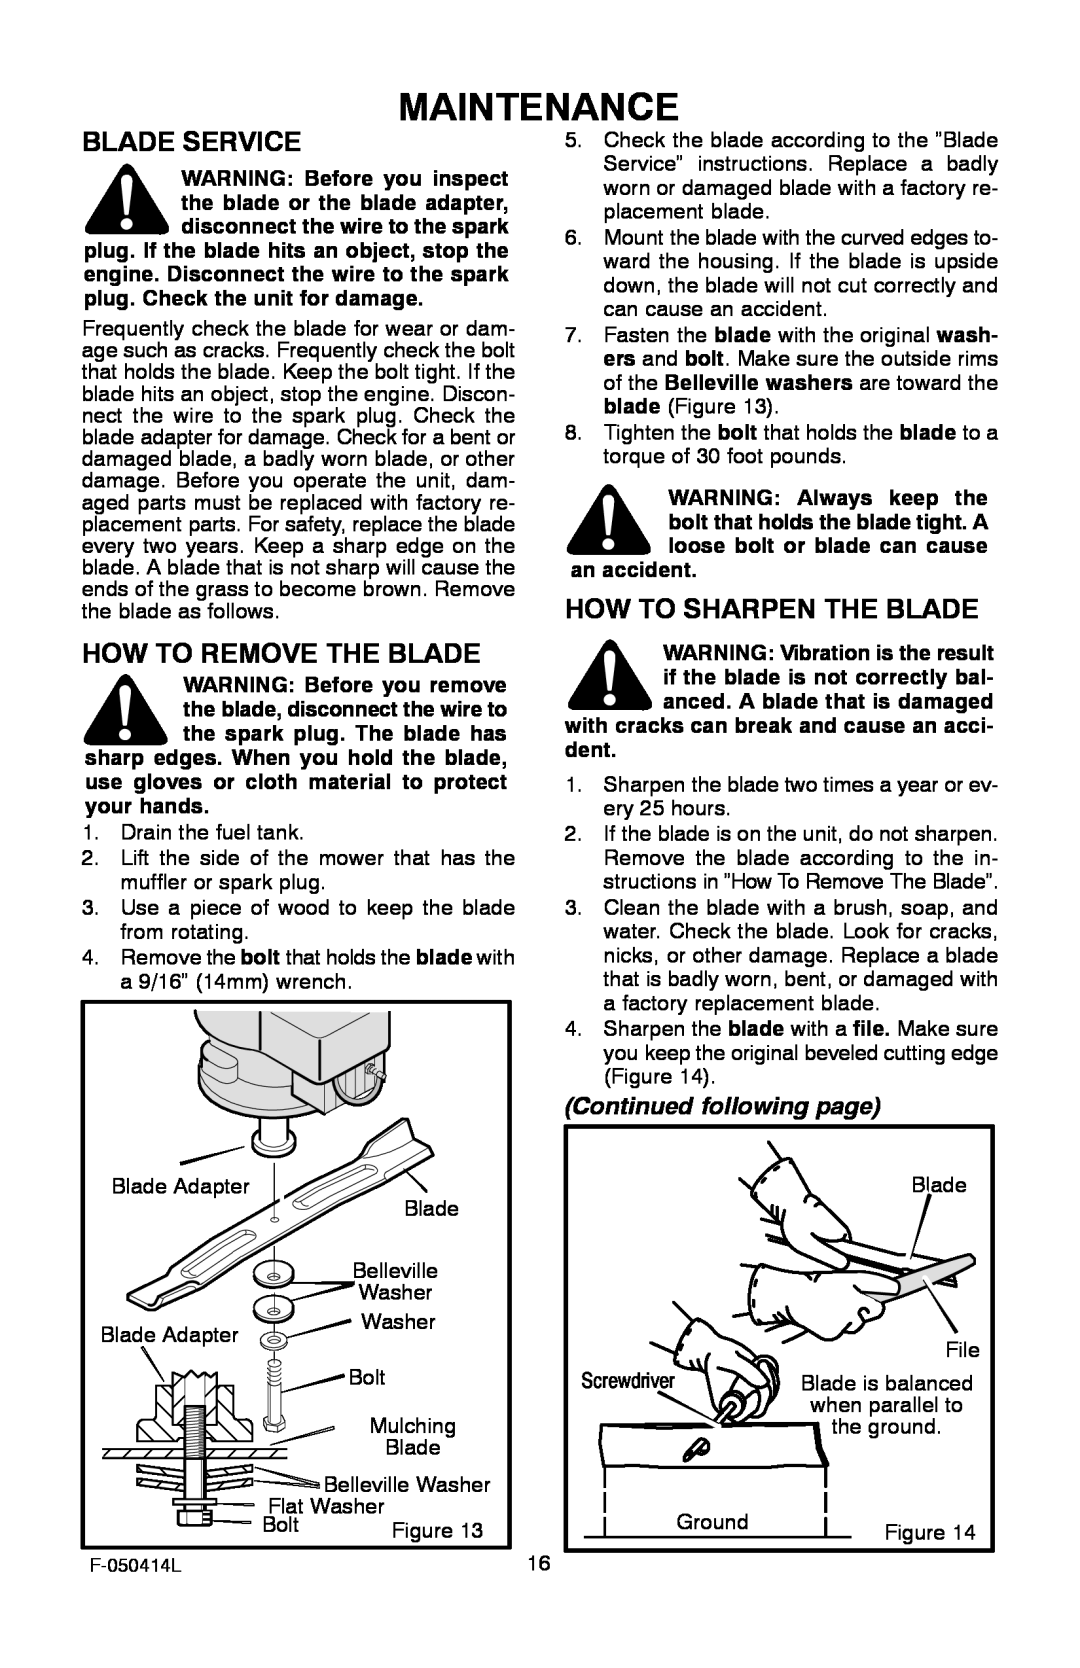 Adams 22 manual Maintenance, Blade Service, How To Sharpen The Blade, How To Remove The Blade, Continued following page 